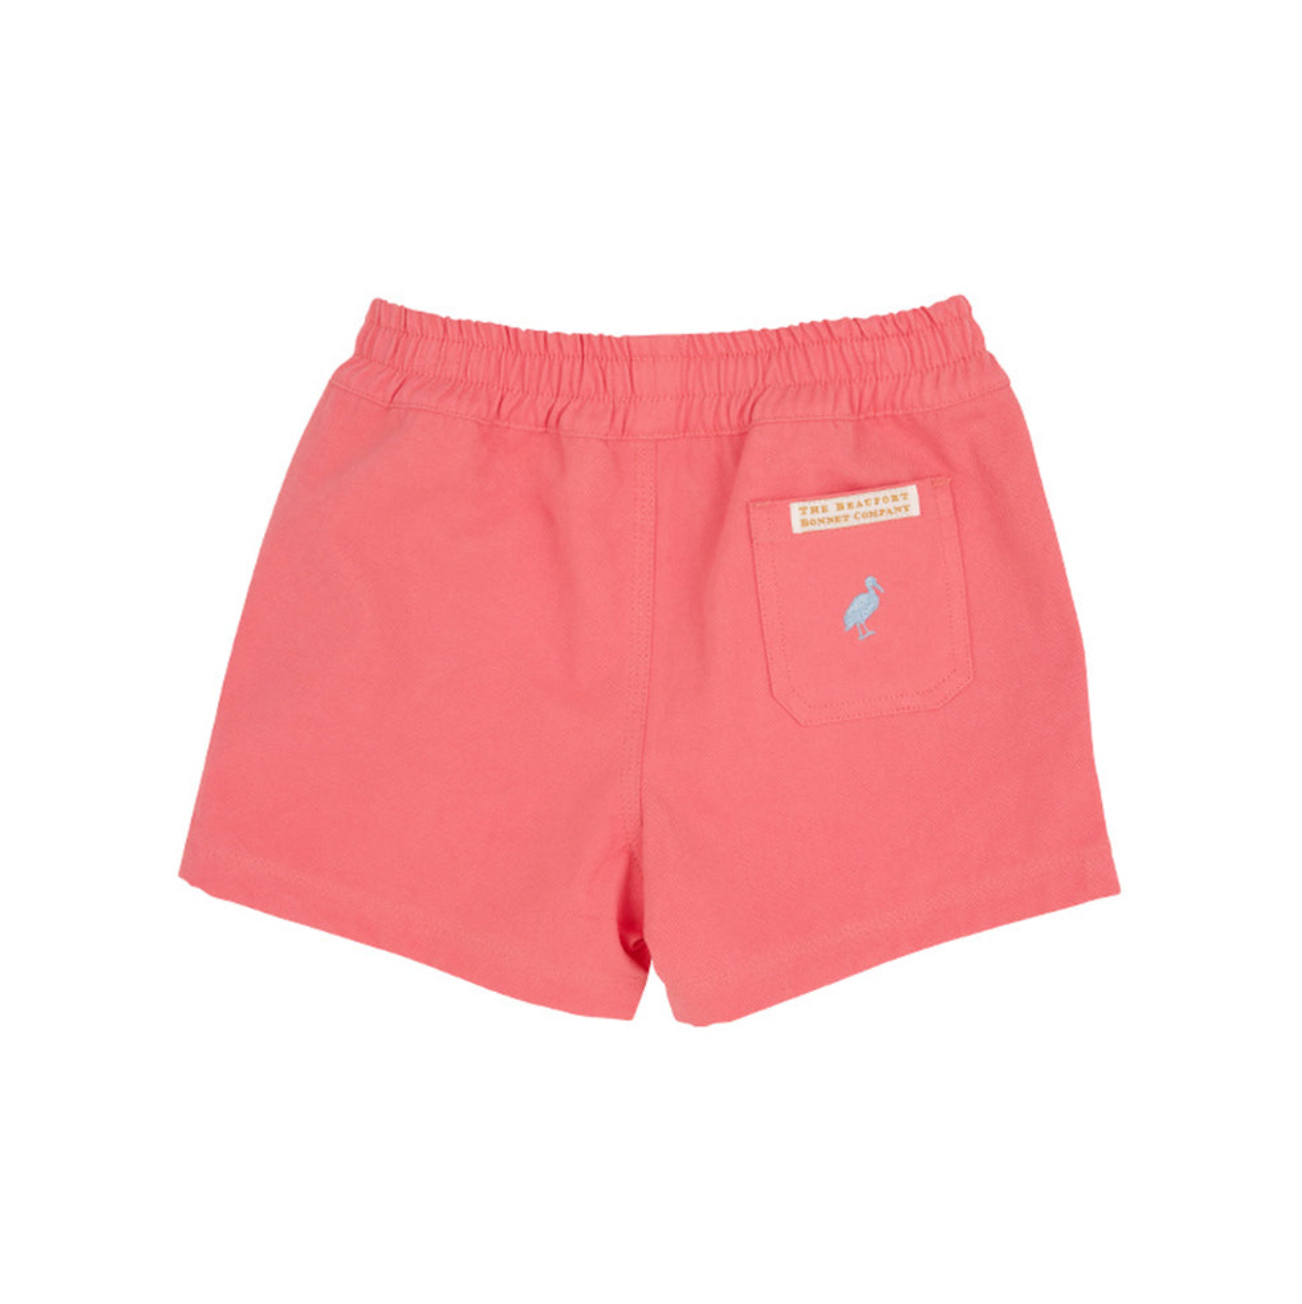 Sheffield Shorts Parrot Cay Coral/Beale Street Blue